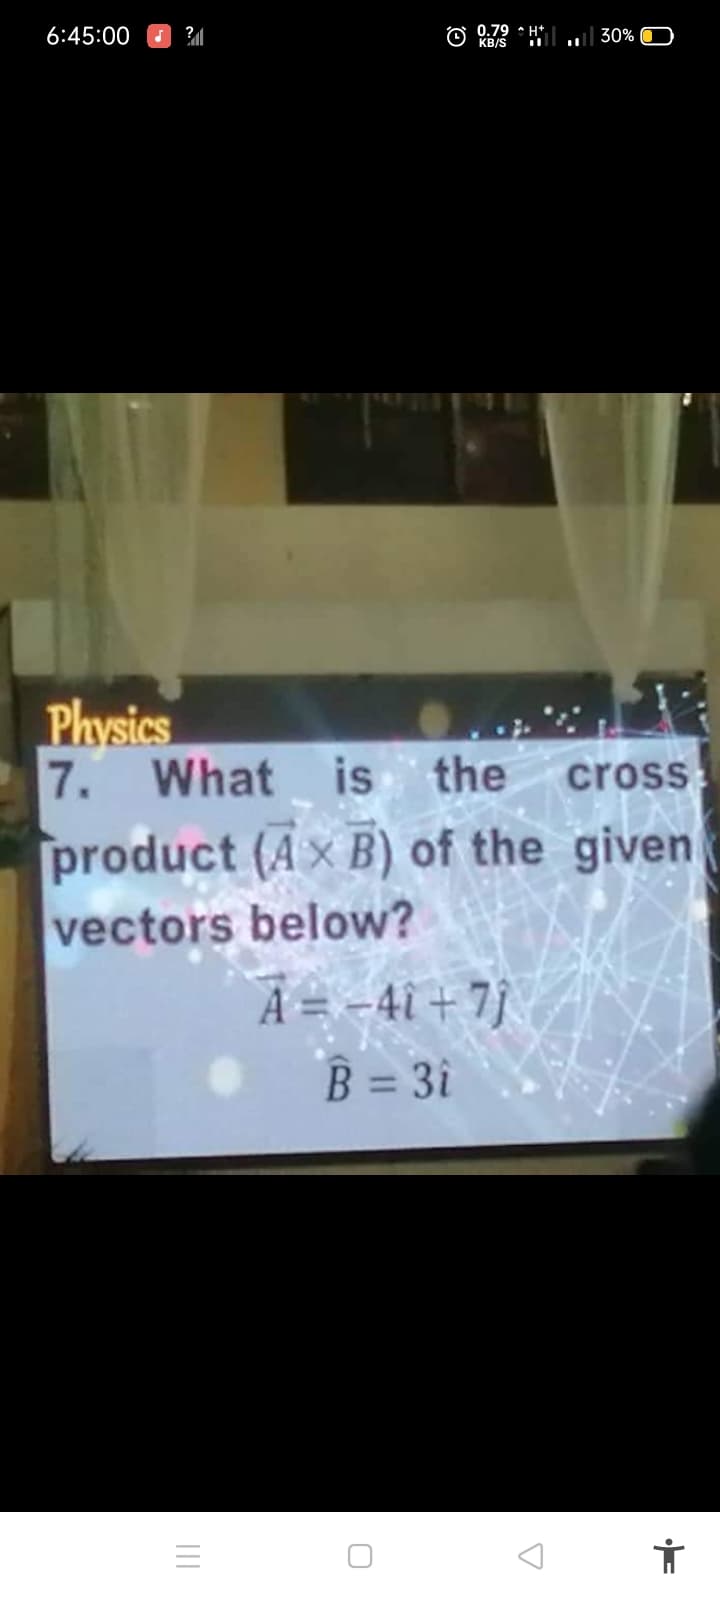 6:45:00 O ?M
0.79 • H*.
KB/S
30%
Physics
7. What is the
cross
product (A x B) of the given
vectors below?
A = -4i + 7}
B = 3i
%3D
